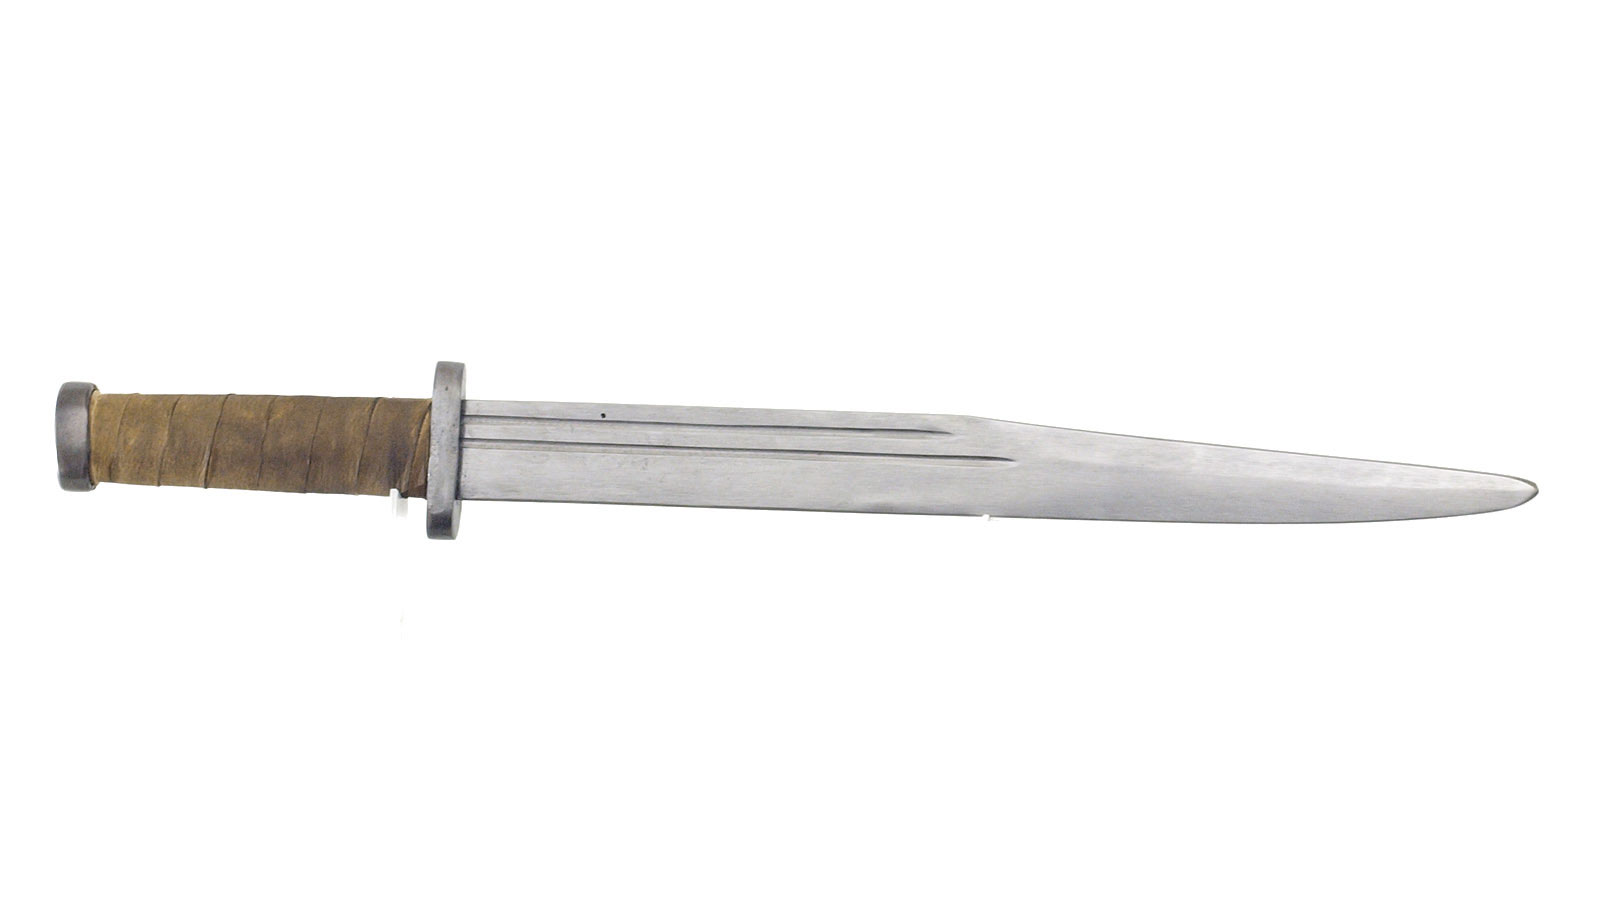 Sax Knife, Version Feather Blade